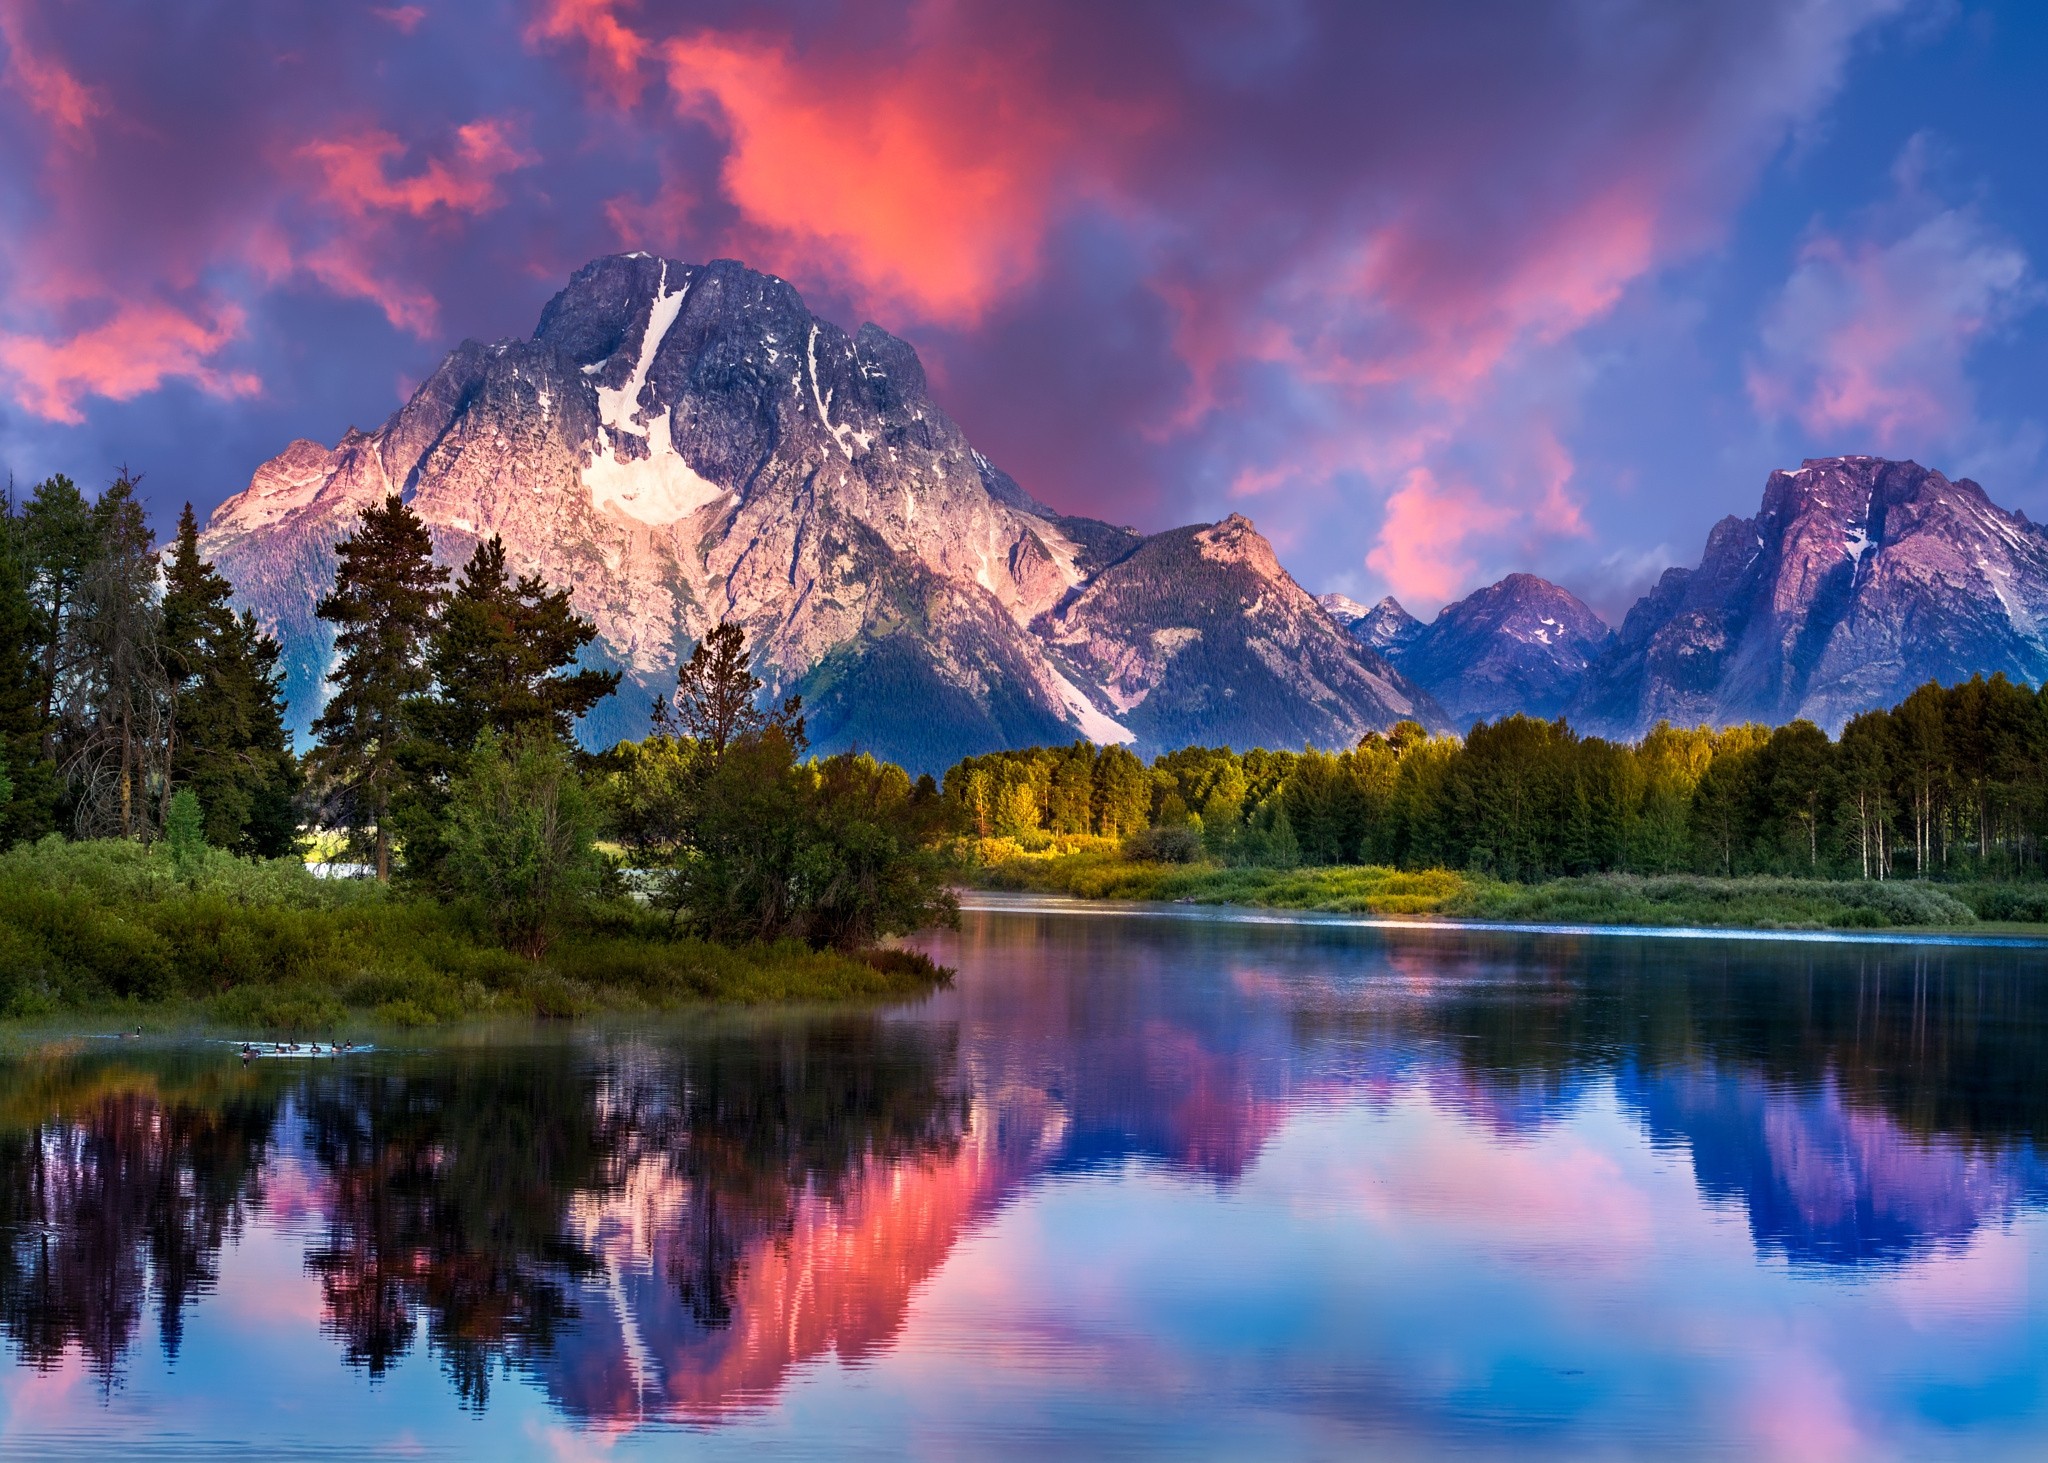 General 2048x1463 nature landscape mountains river forest grass snowy peak sky clouds reflection Grand Teton National Park Wyoming water USA